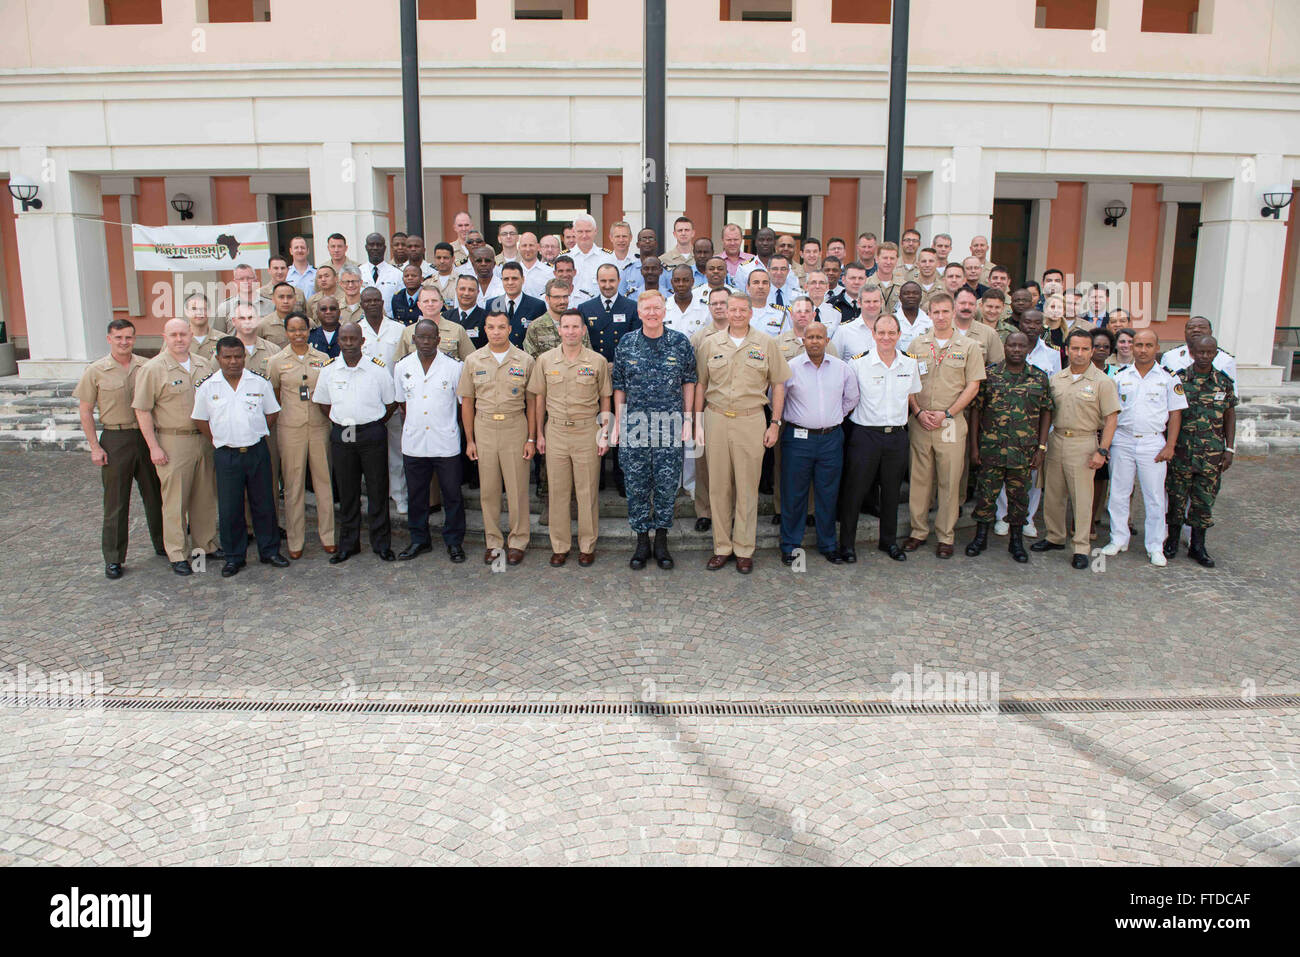 150506-N-OX801-180 NAVAL SUPPORT ACTIVITY NAPLES, Italy (May 6, 2015)  Commander, U.S. 6th Fleet Vice Adm. James Foggo III, center, and participants of the Africa Partnership Station (APS) Annual Planning Conference at Naval Support Activity Naples, Italy, May 6, 2015. The conference aims to align individual African nation maritime security goals, APS training opportunities, and comprehensive regional standards. (U.S. Navy photo by Mass Communication Specialist 3rd Class Daniel P. Schumacher/Released) Stock Photo